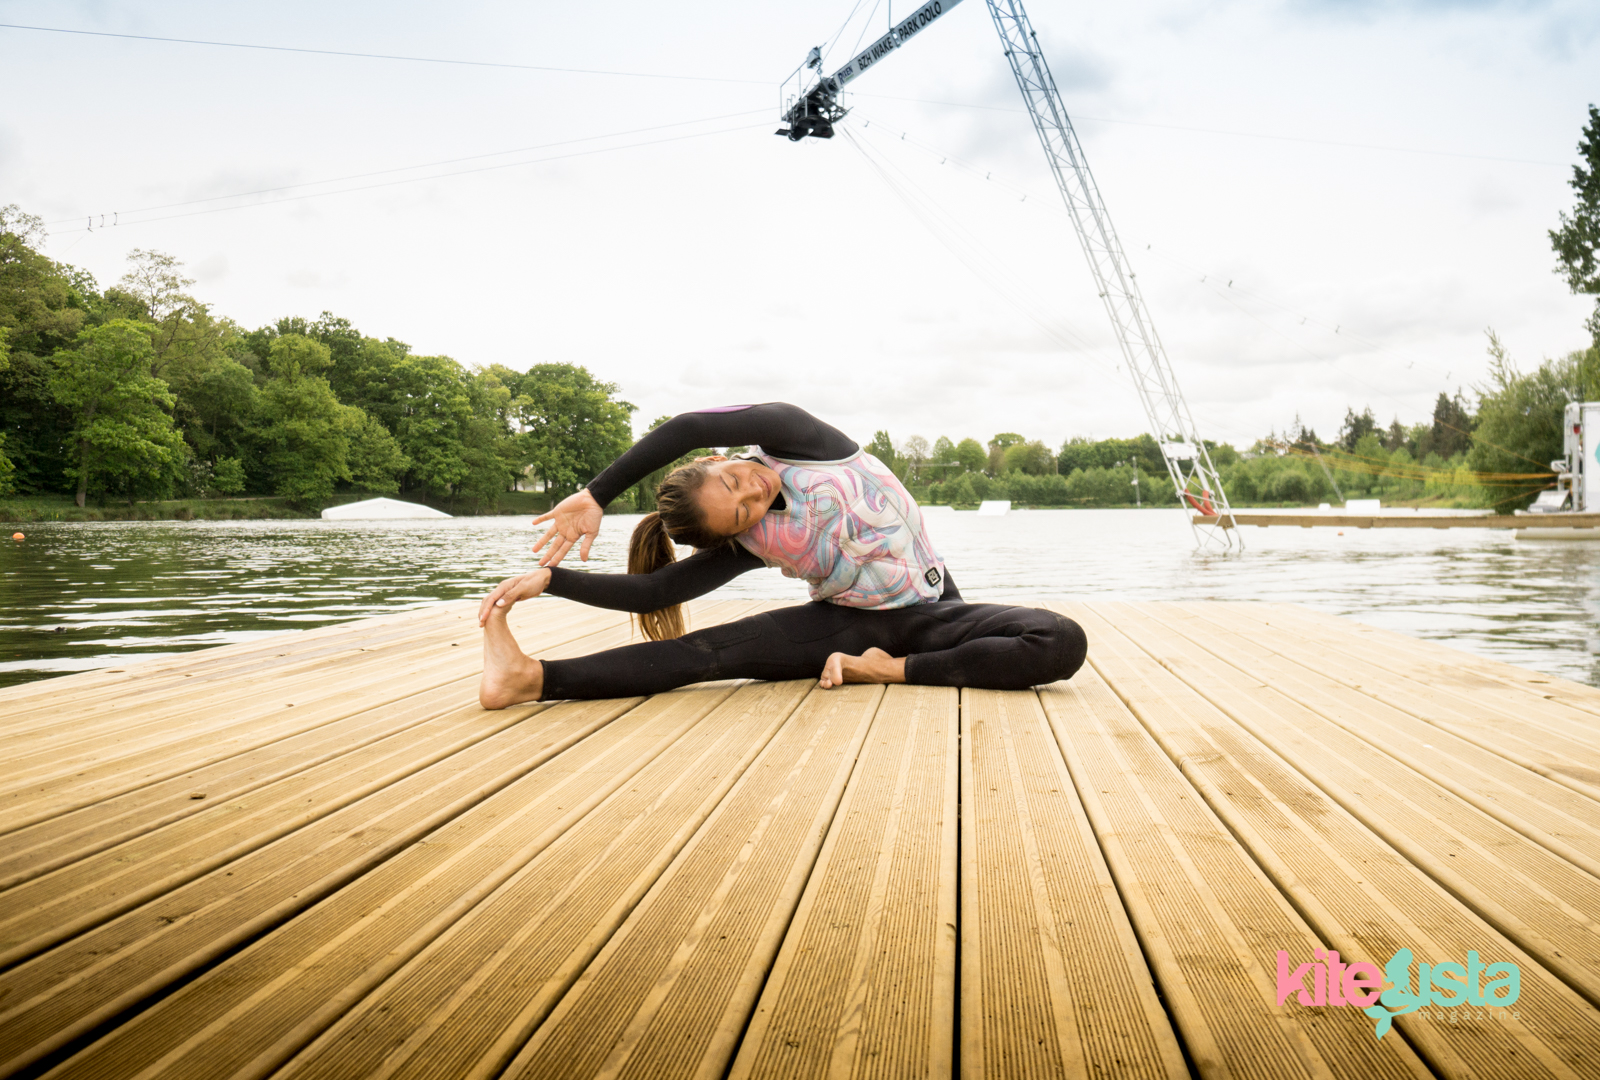 How to Stretch for wakeboarding - Paula Rosales